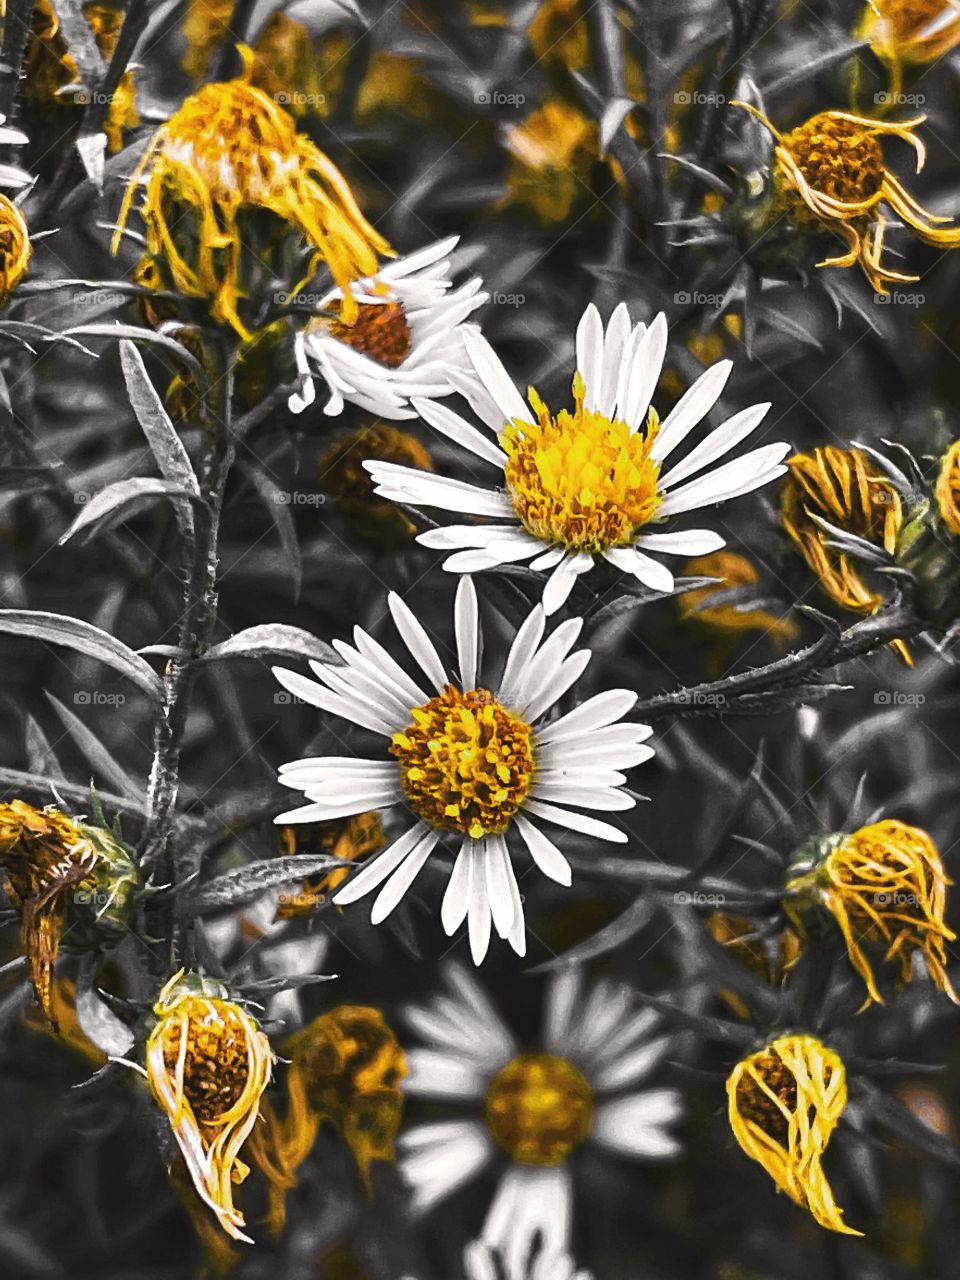 Wildflower color pop splash of colors flower outdoors plant beautiful photography contrast Petals blossom bud yellowish Spring gloomy flowering Beautiful beauty nature wild flowers Gray and yellow stems phone photo Black and white tones colorful 